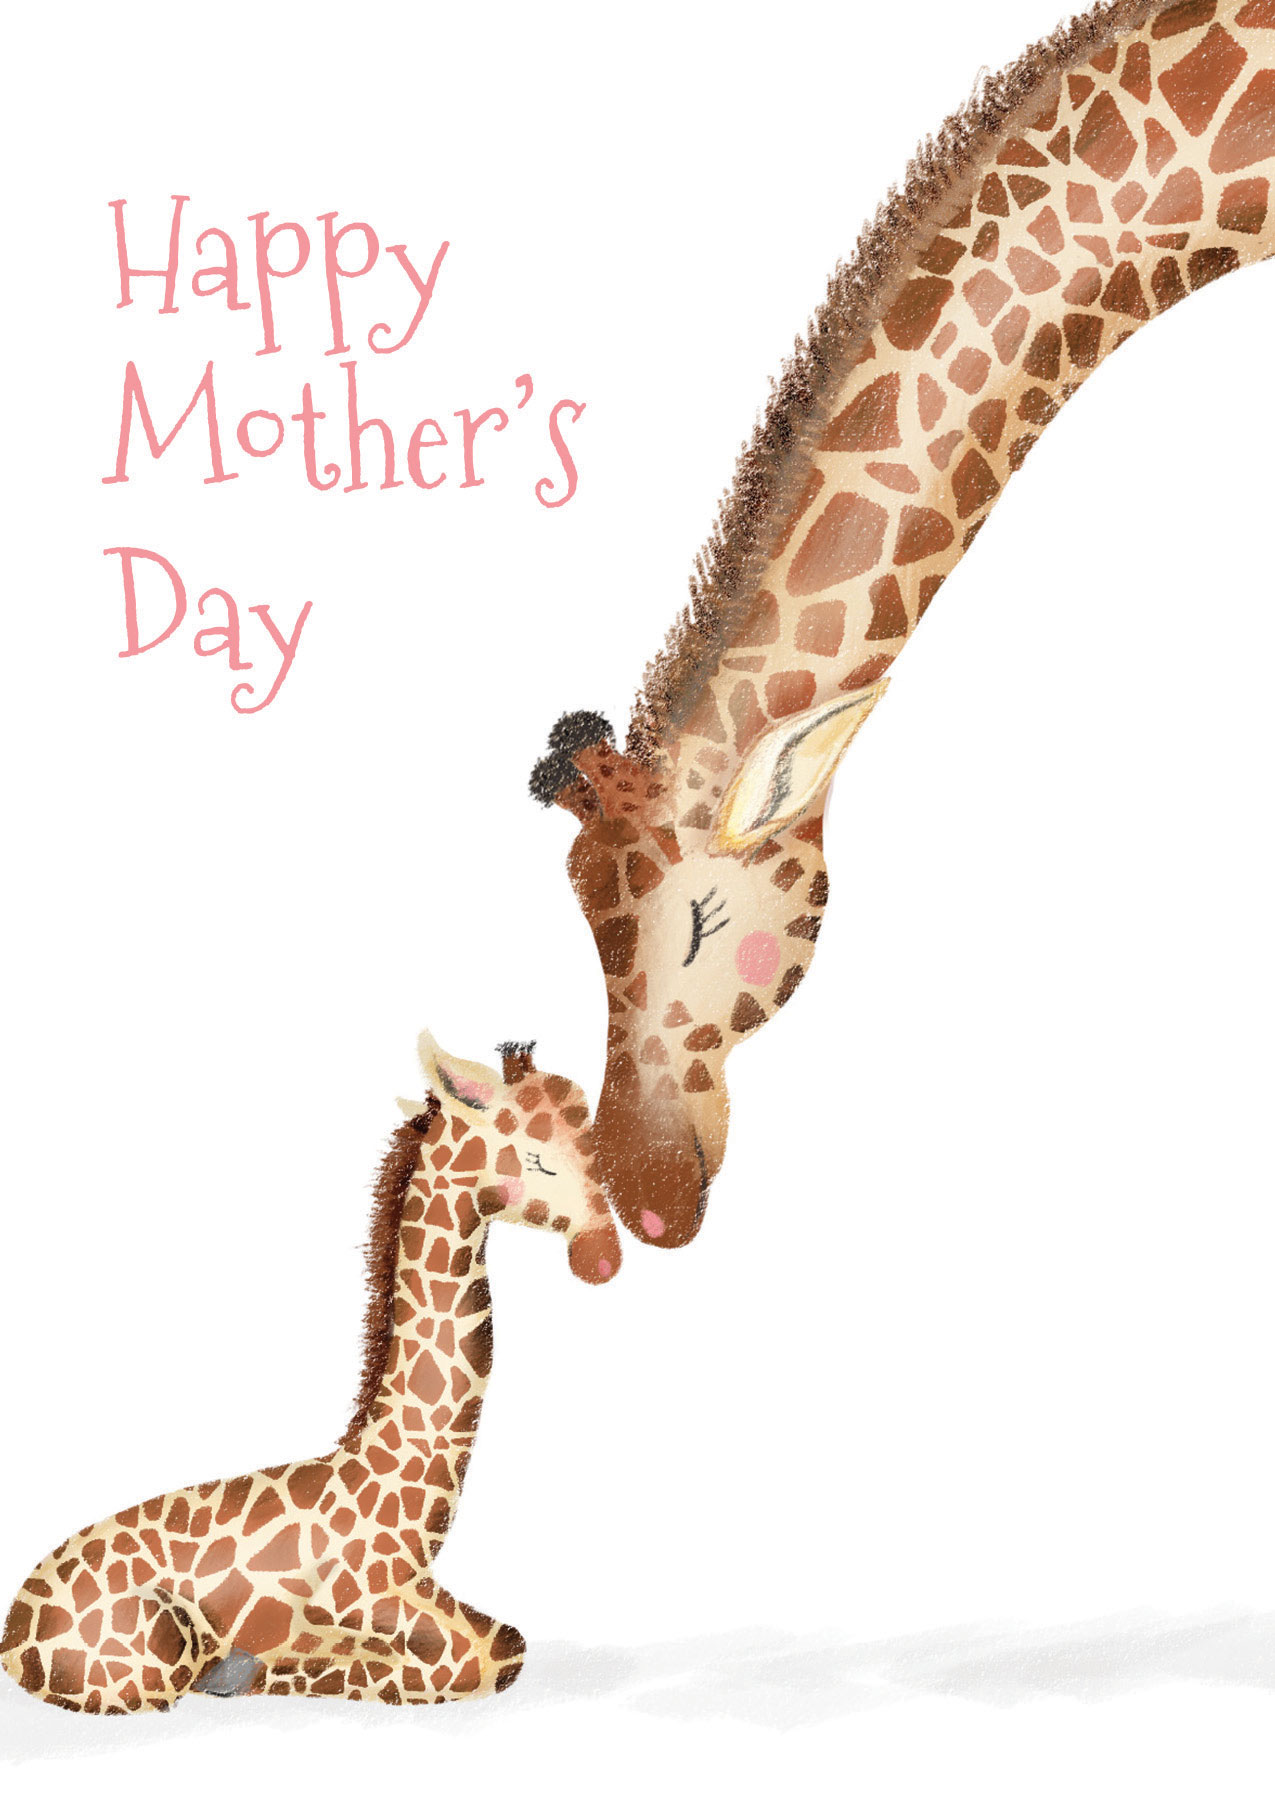 Giraffe mother and baby nuzzling noses, with Happy Mother's Day written above them